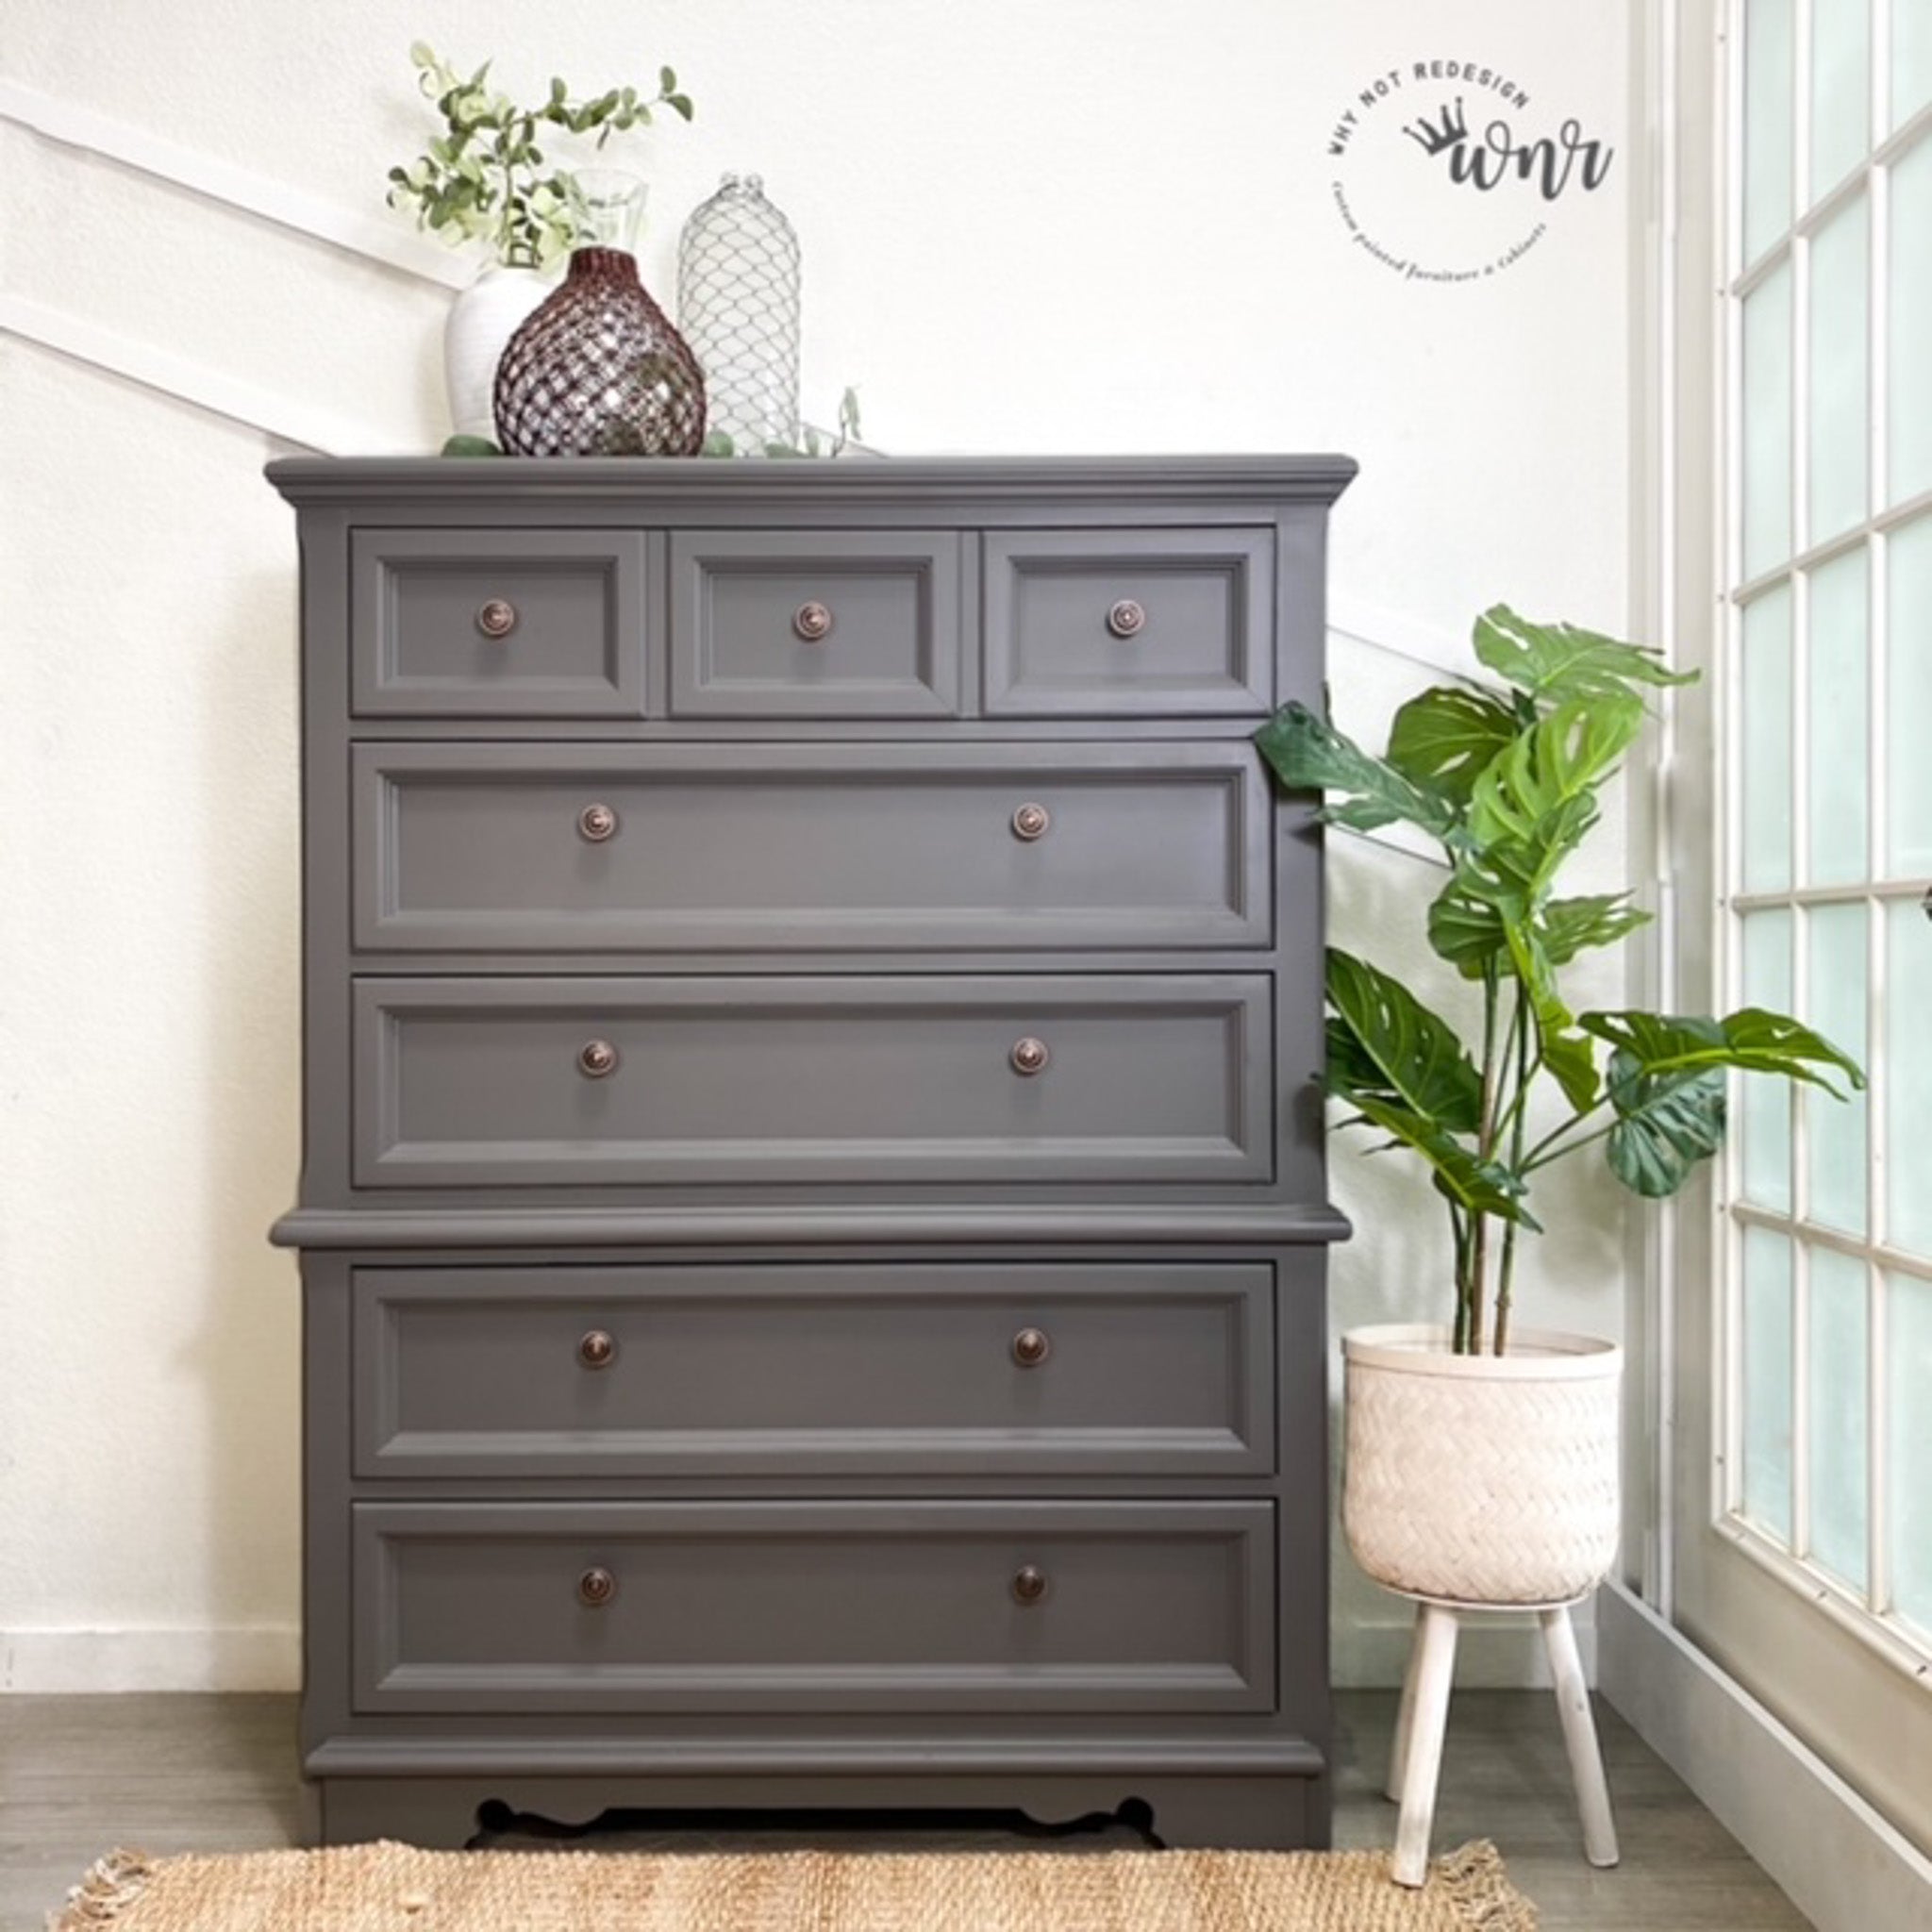 A vintage 5-drawer chest dresser refurbished by Why Not Redesign is painted in Dixie Belle's Hurricane Gray chalk mineral paint.